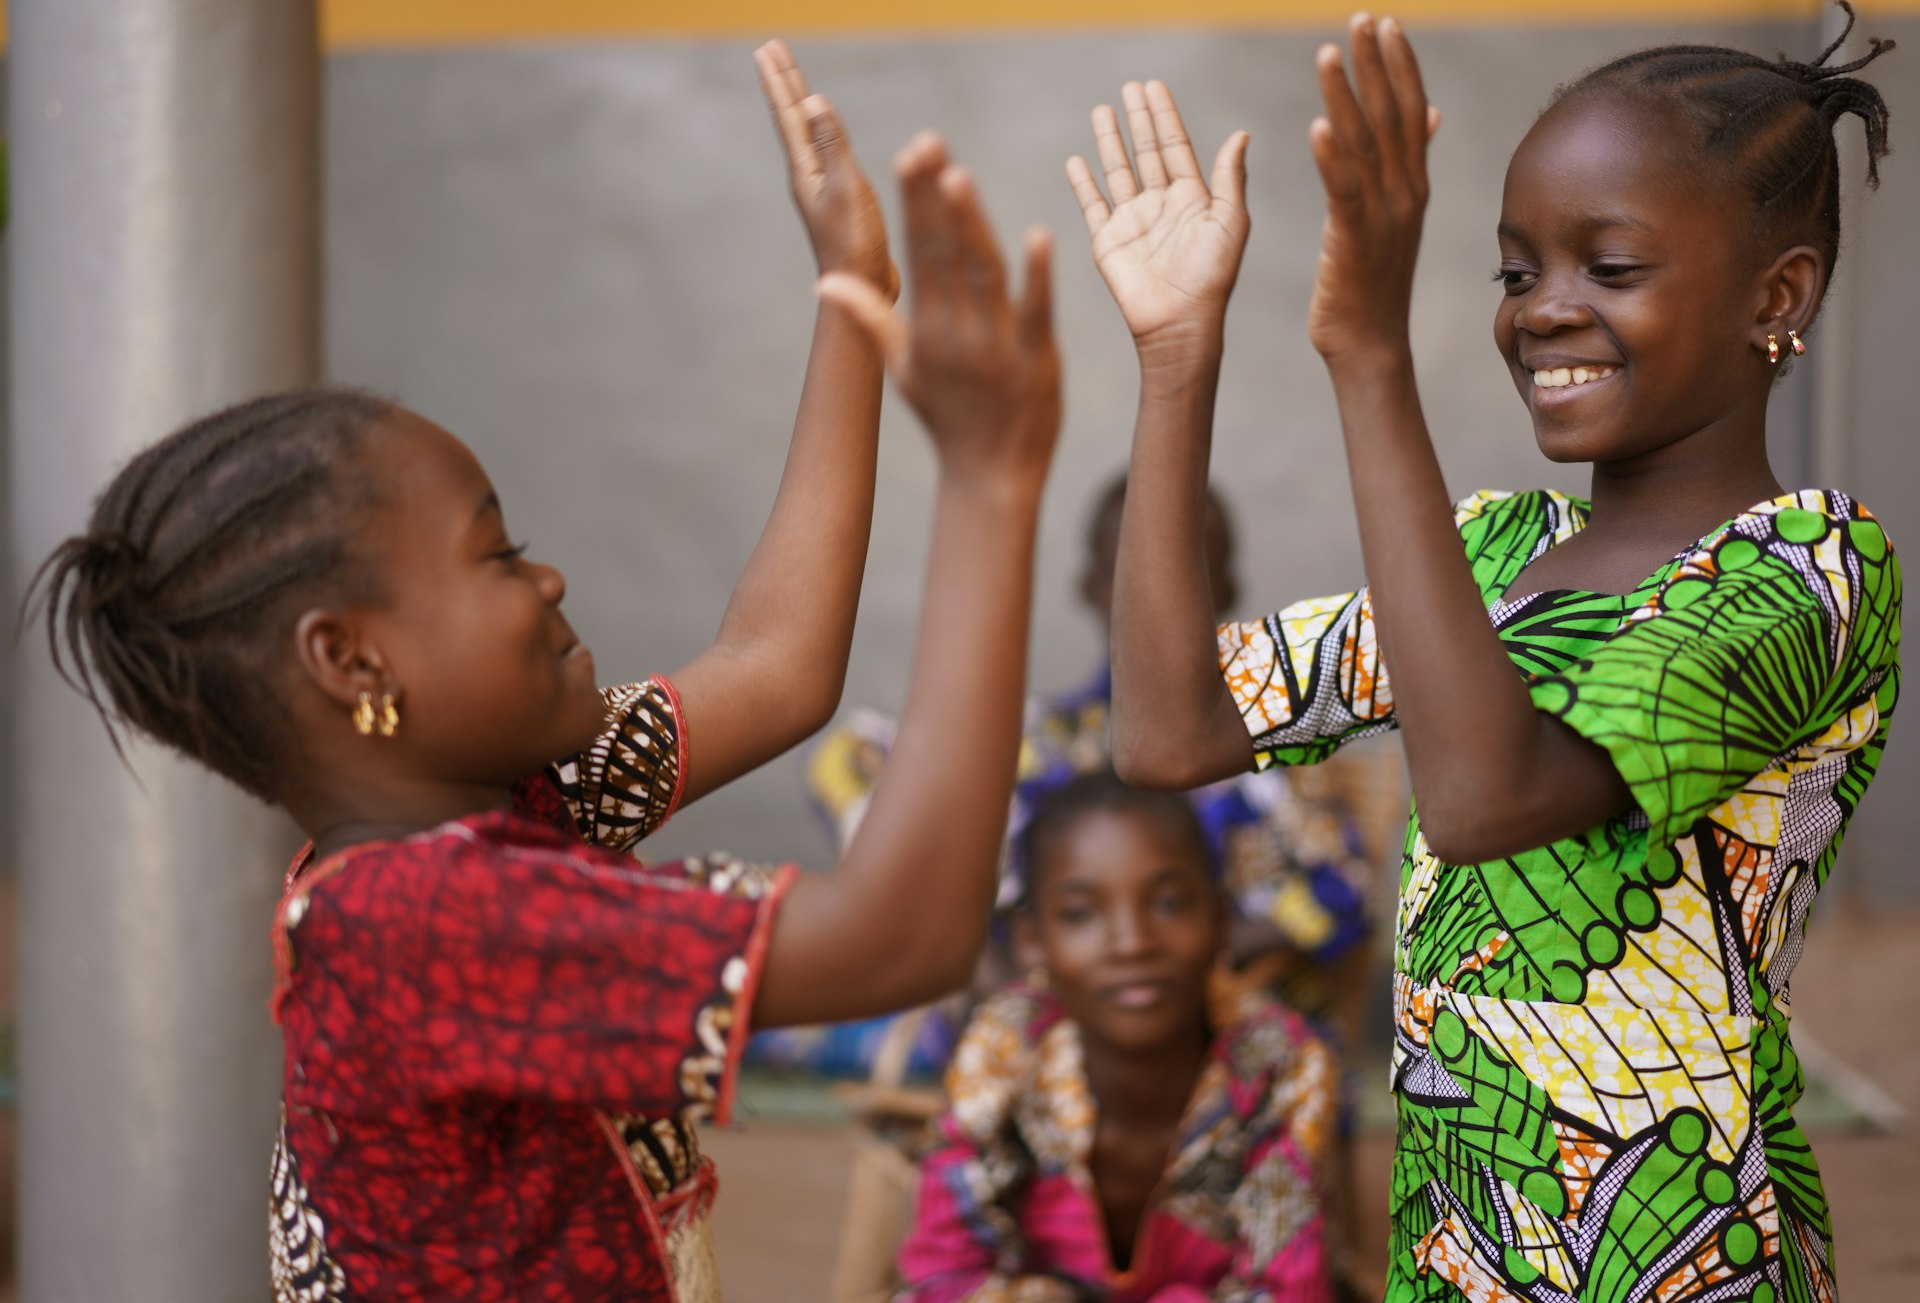 Two children in brightly colored traditional Nigerian dress smile as they play a hand-clapping game at a celebration